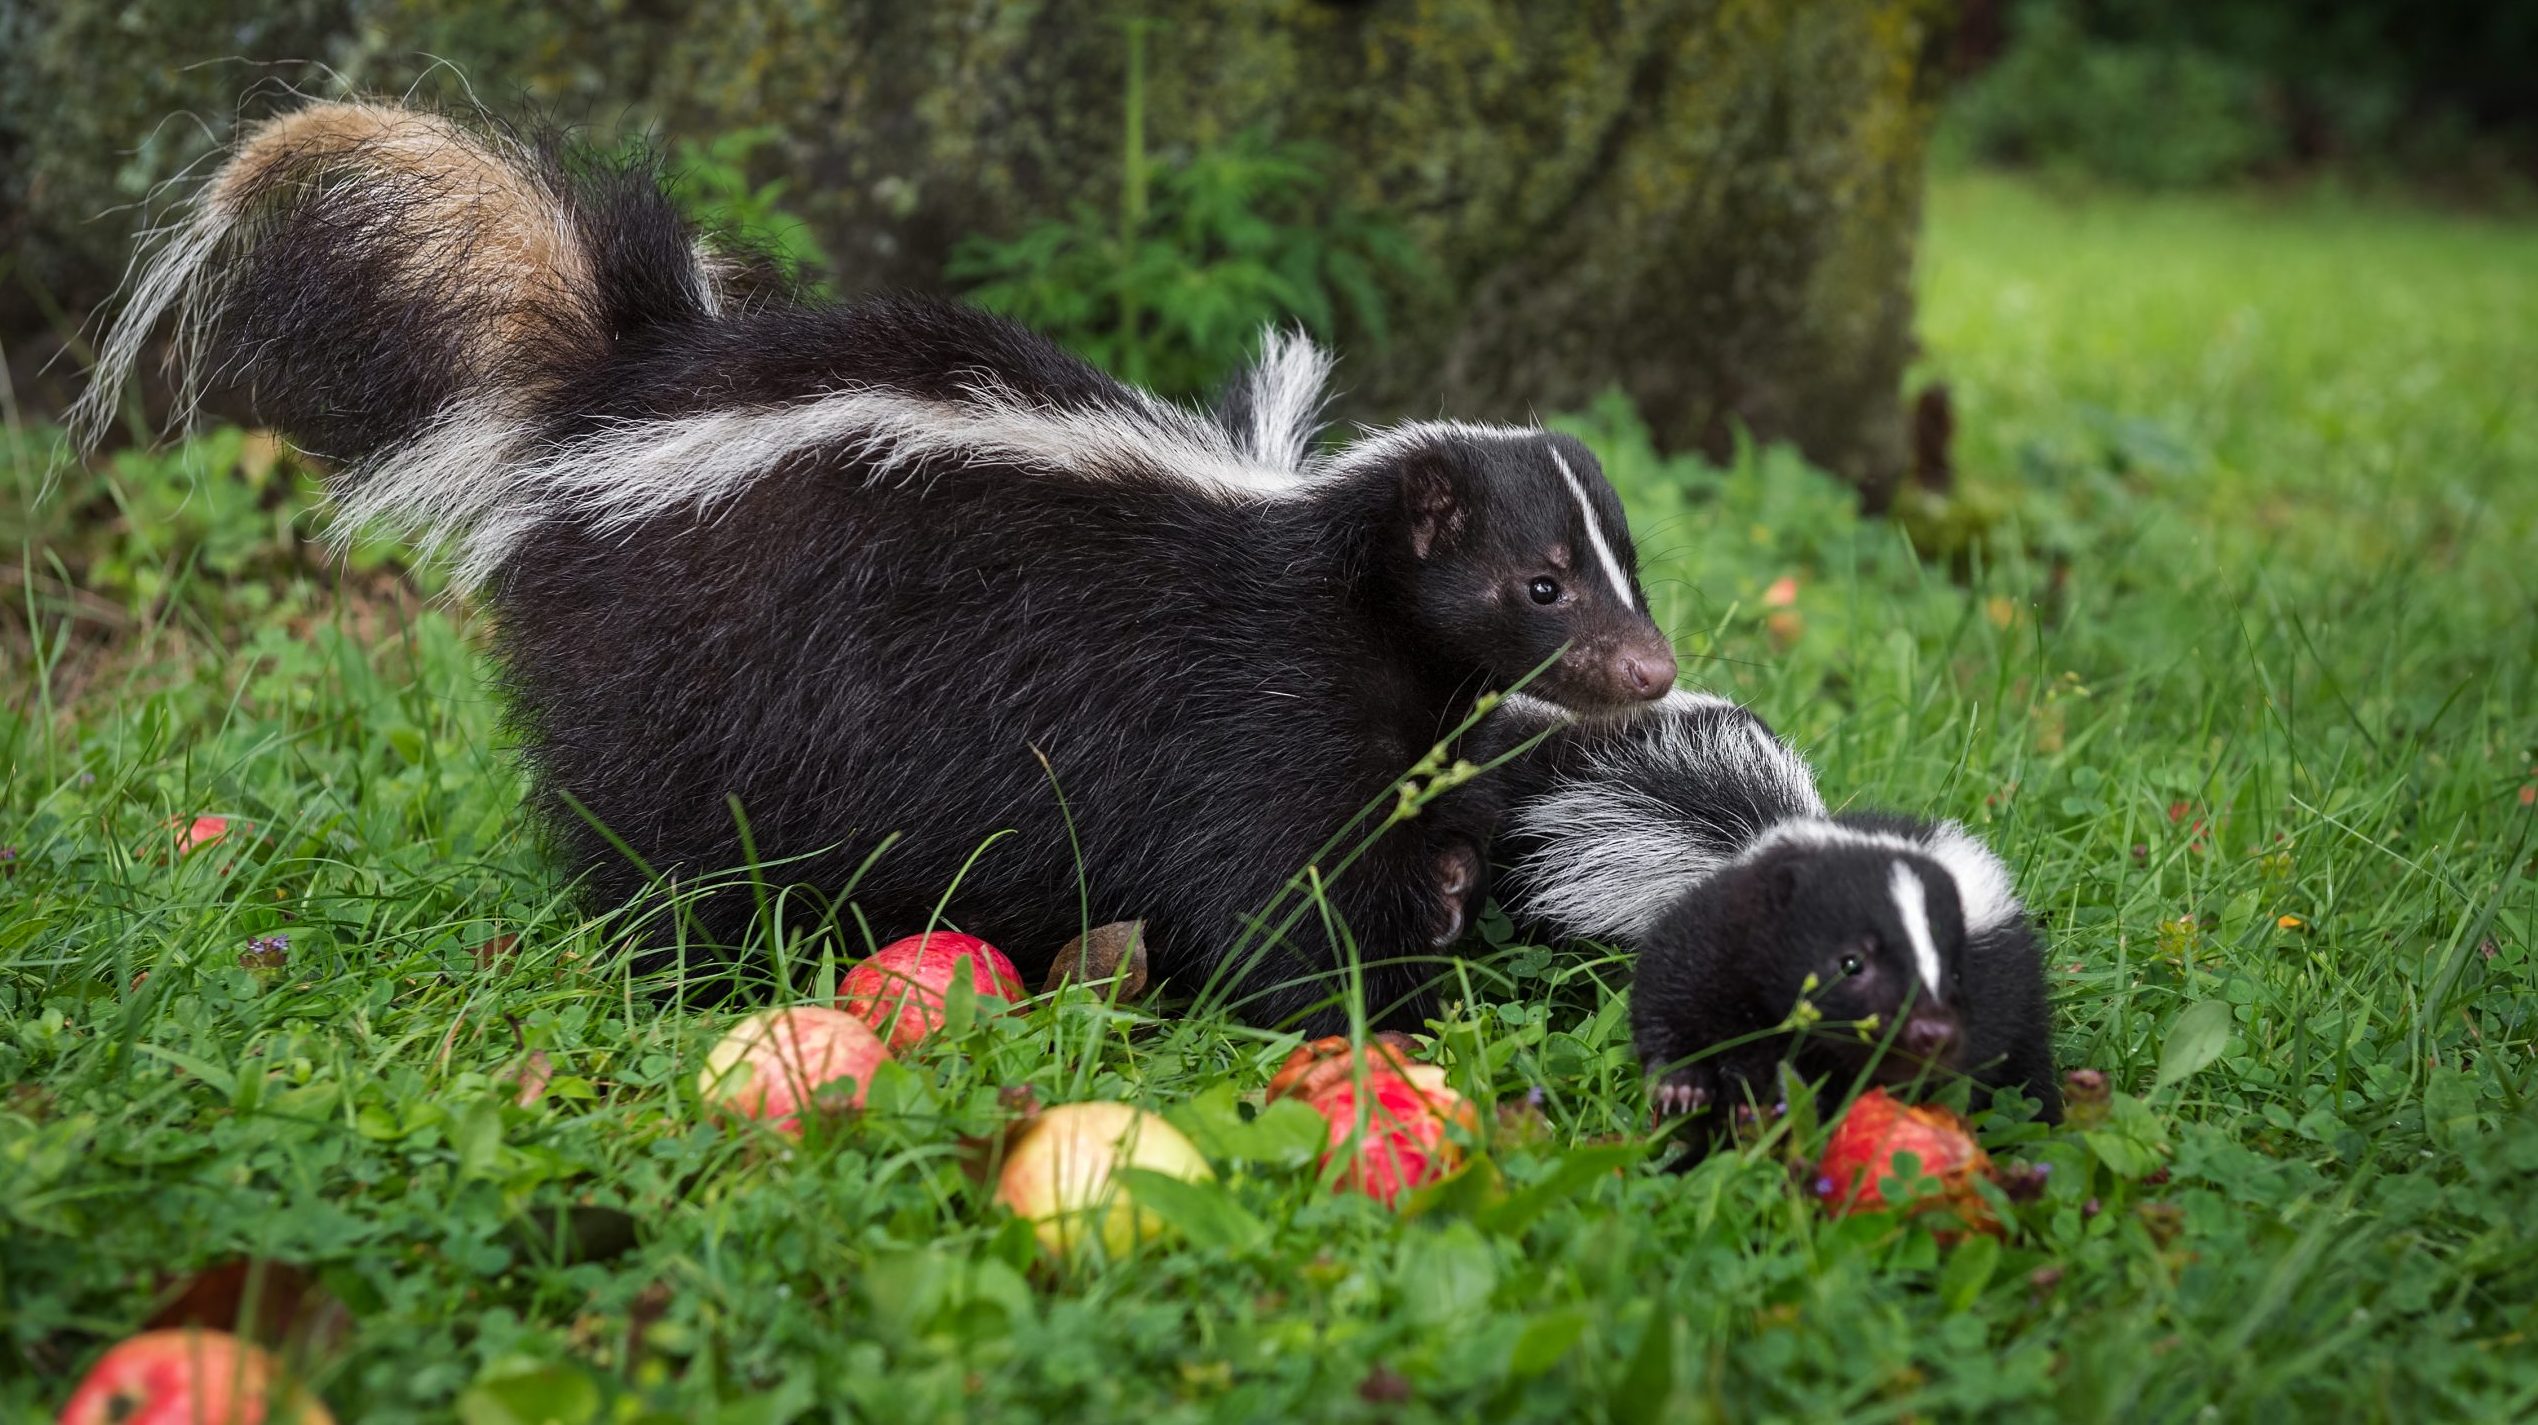 Skunk and baby skunk on lawn with apples